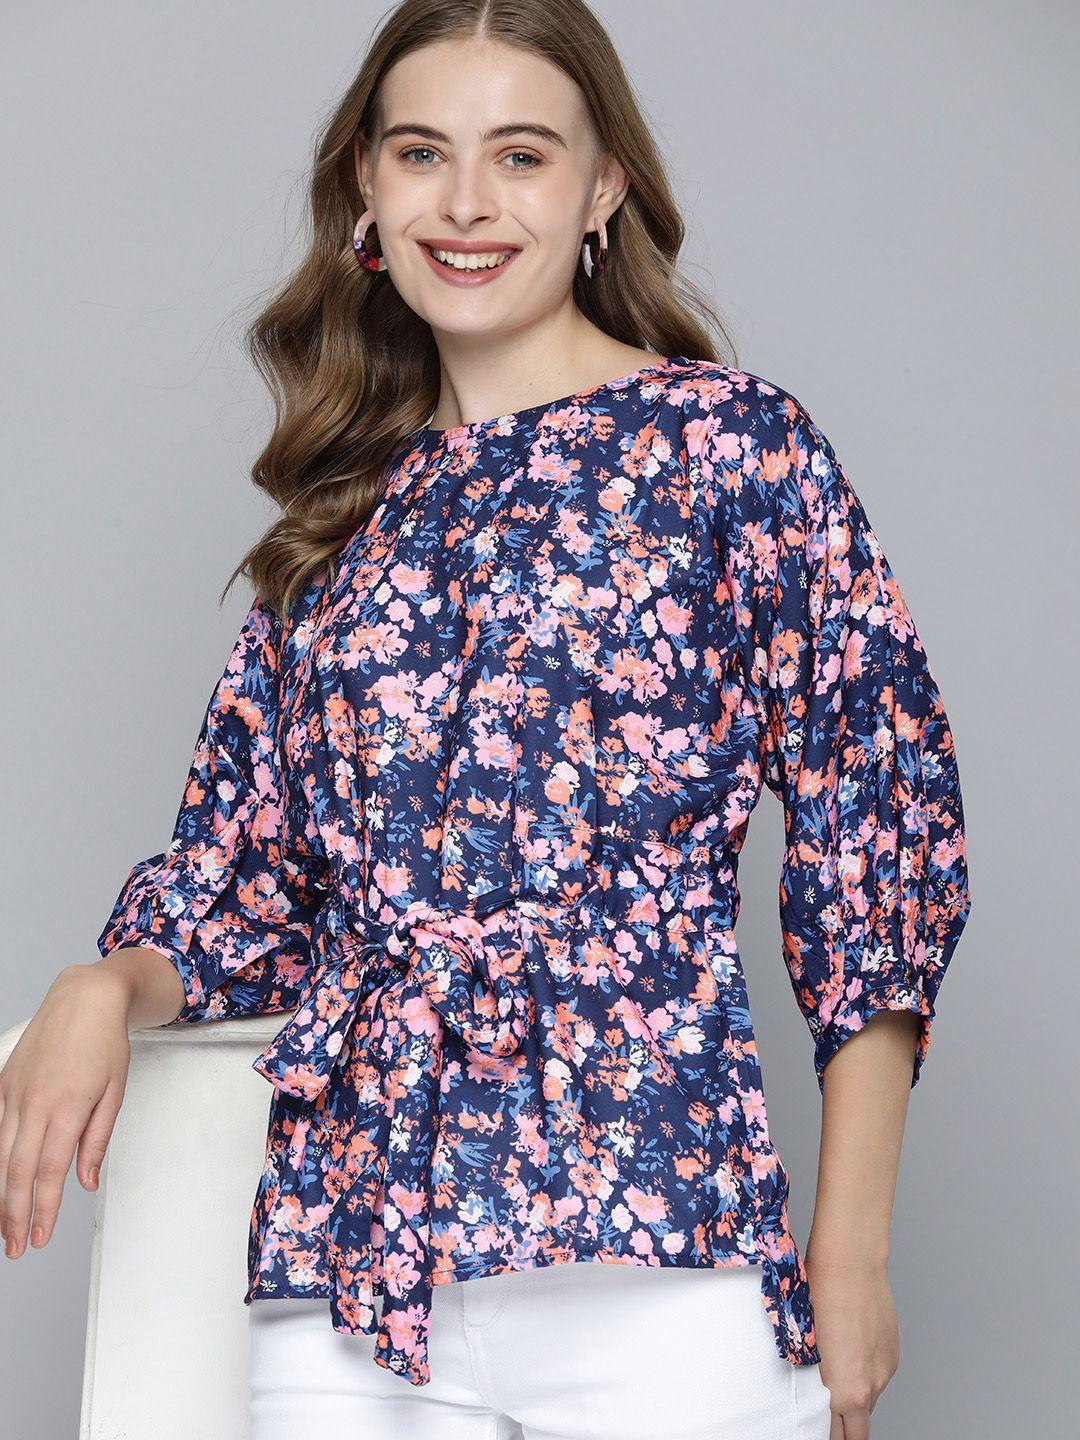 mast & harbour floral print extended sleeves top with waist tie up detailing